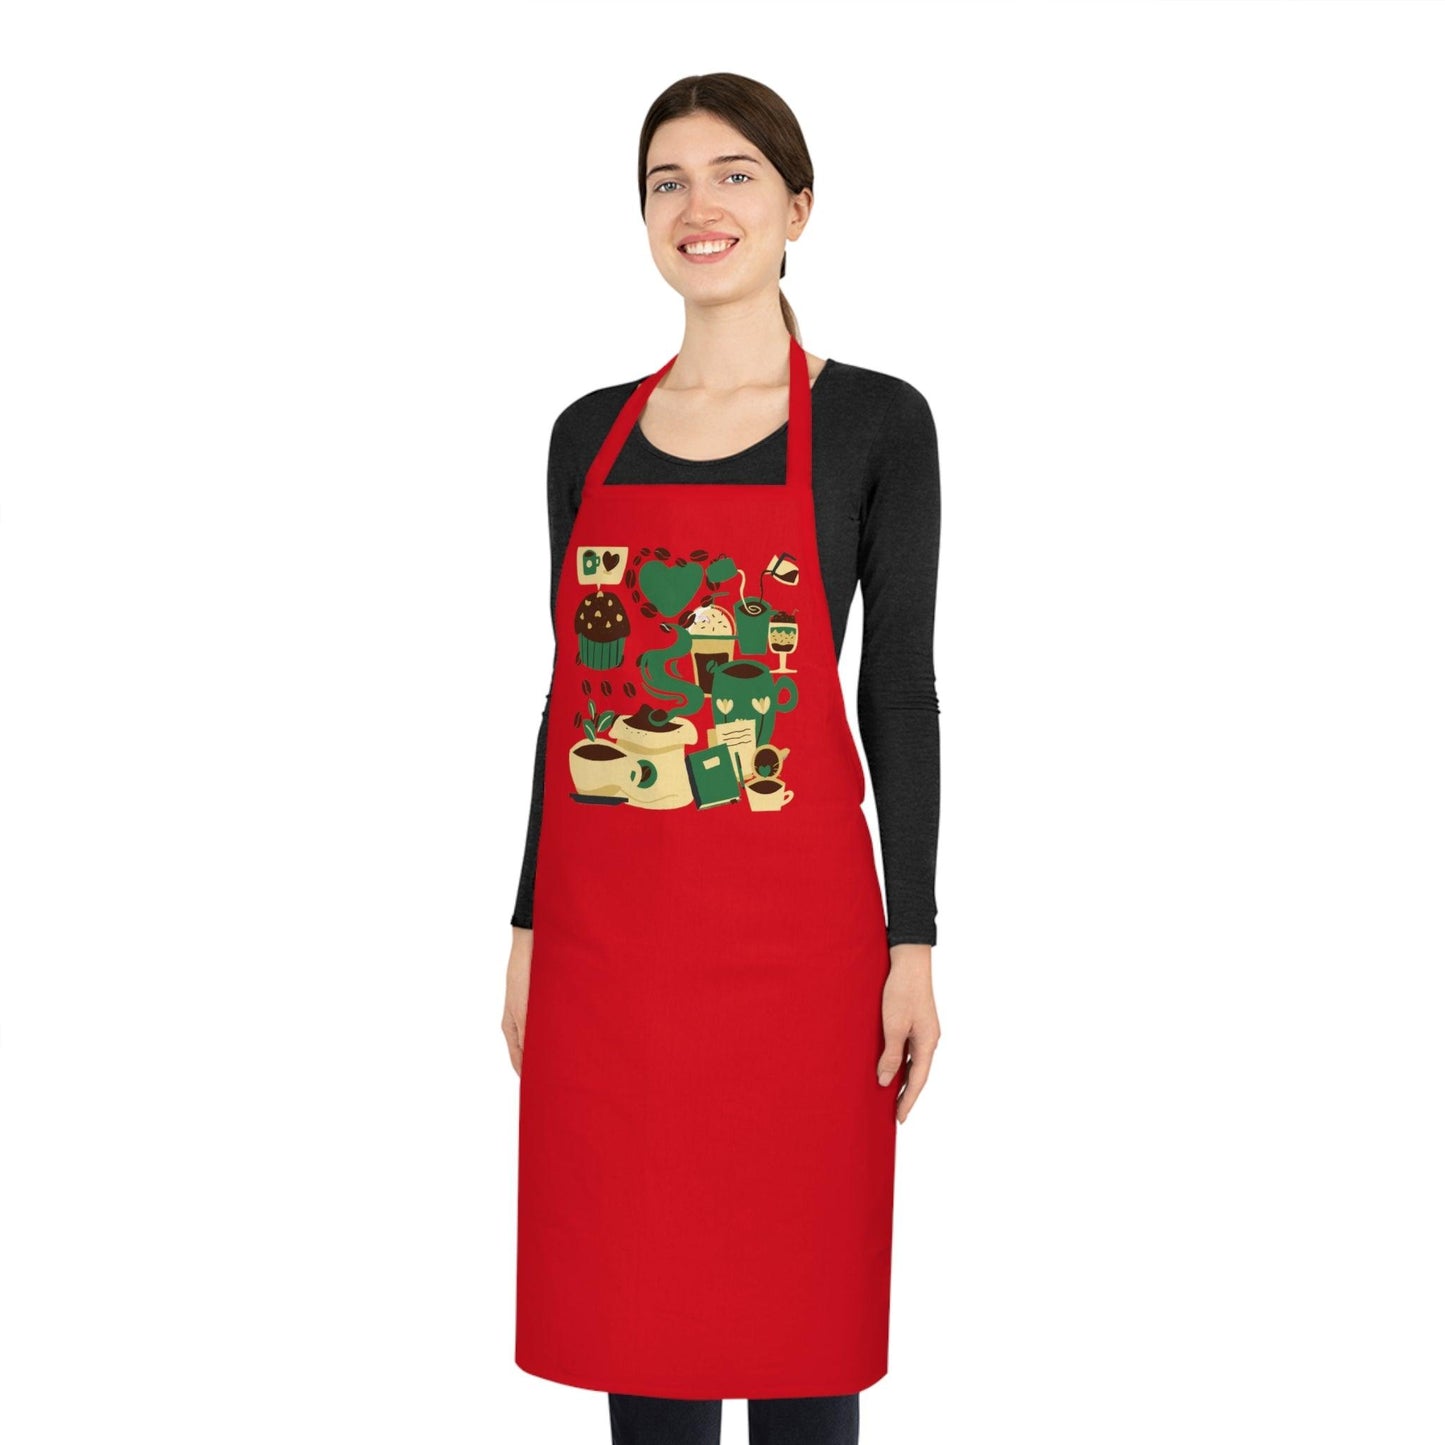 Cooking & Baking Adult Apron - COFFEEBRE